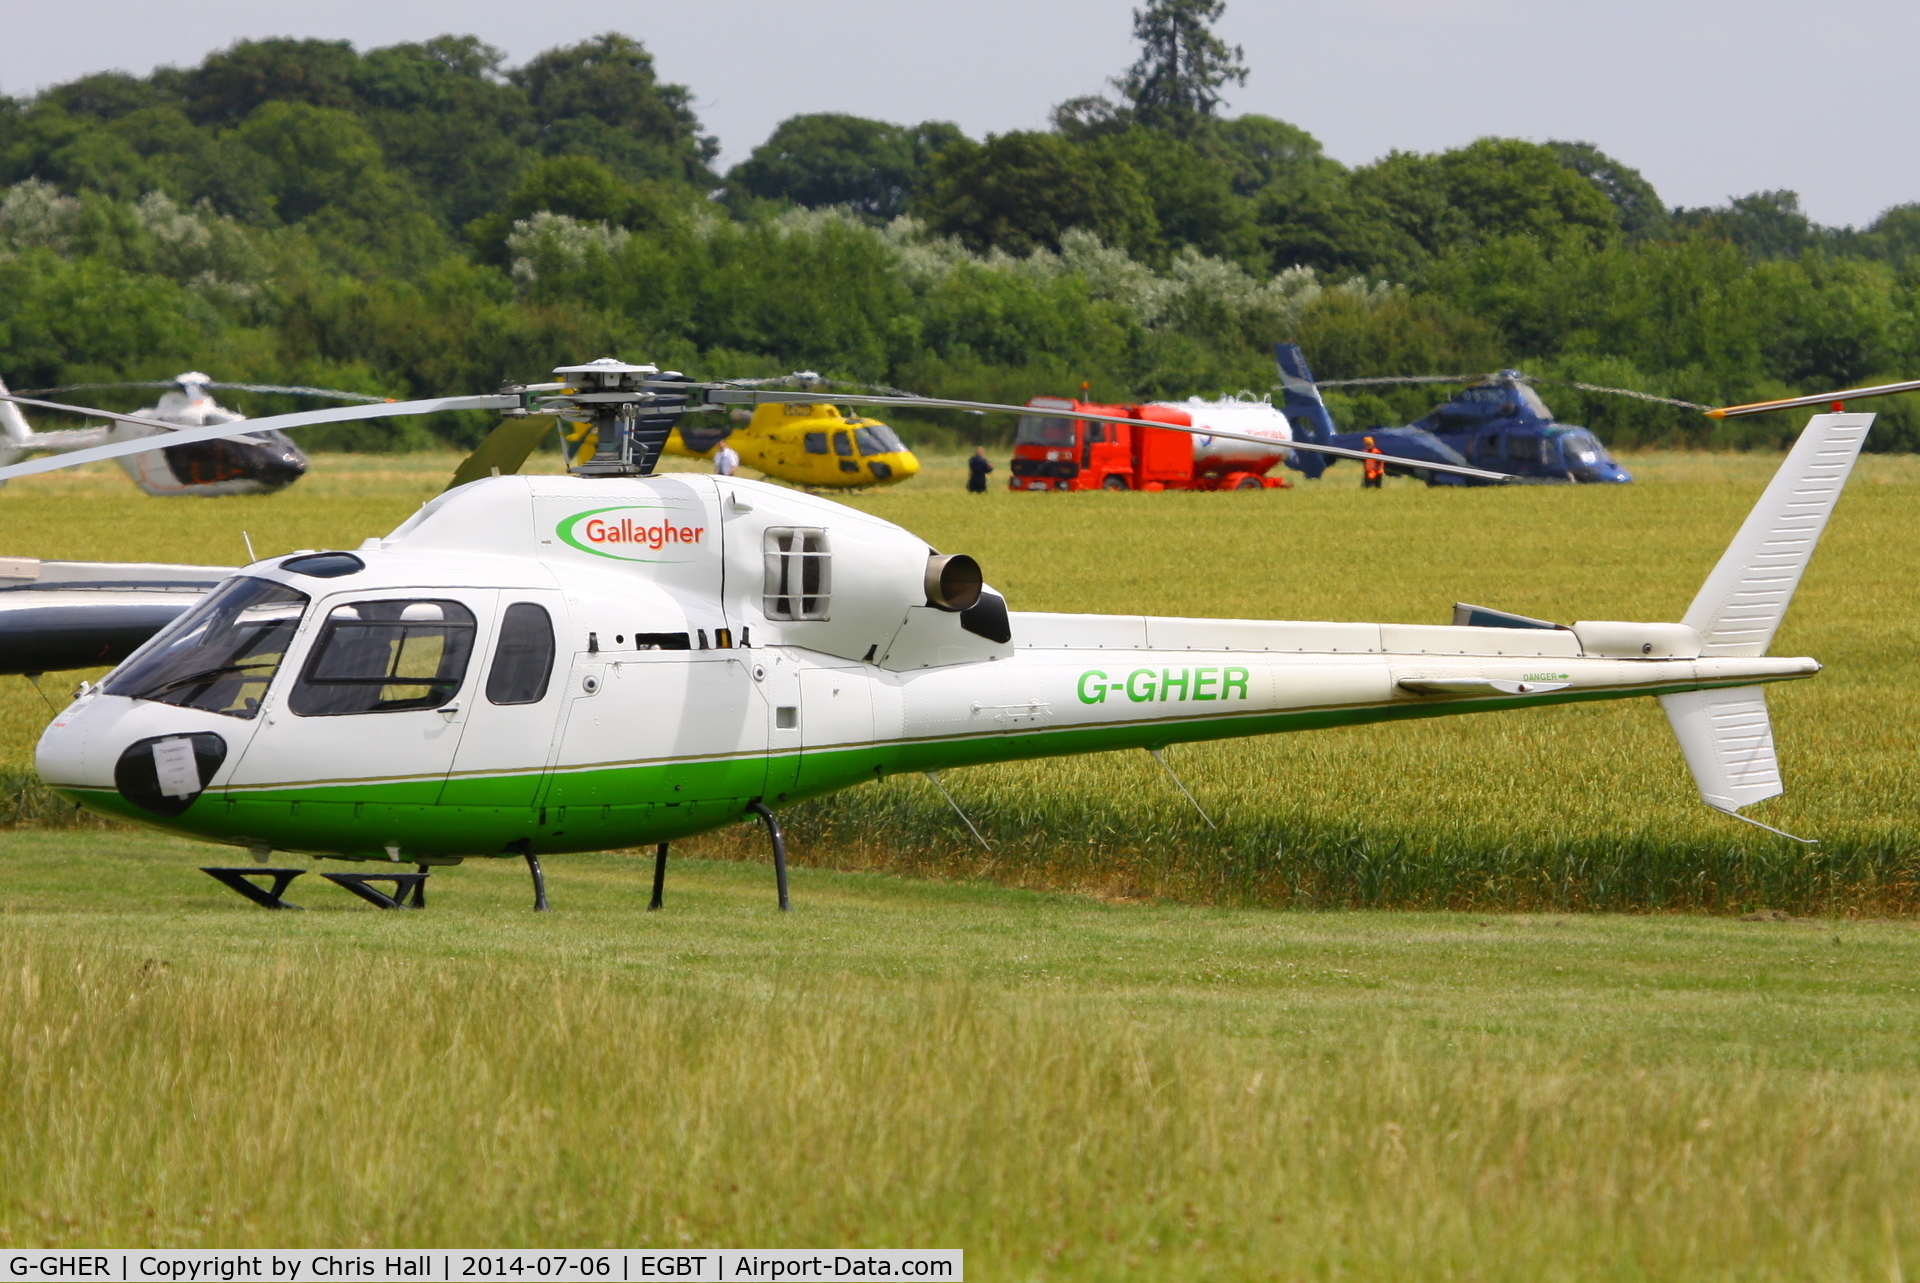 G-GHER, 1998 Eurocopter AS-355N Ecureuil 2 C/N 5658, ferrying race fans to the British F1 Grand Prix at Silverstone